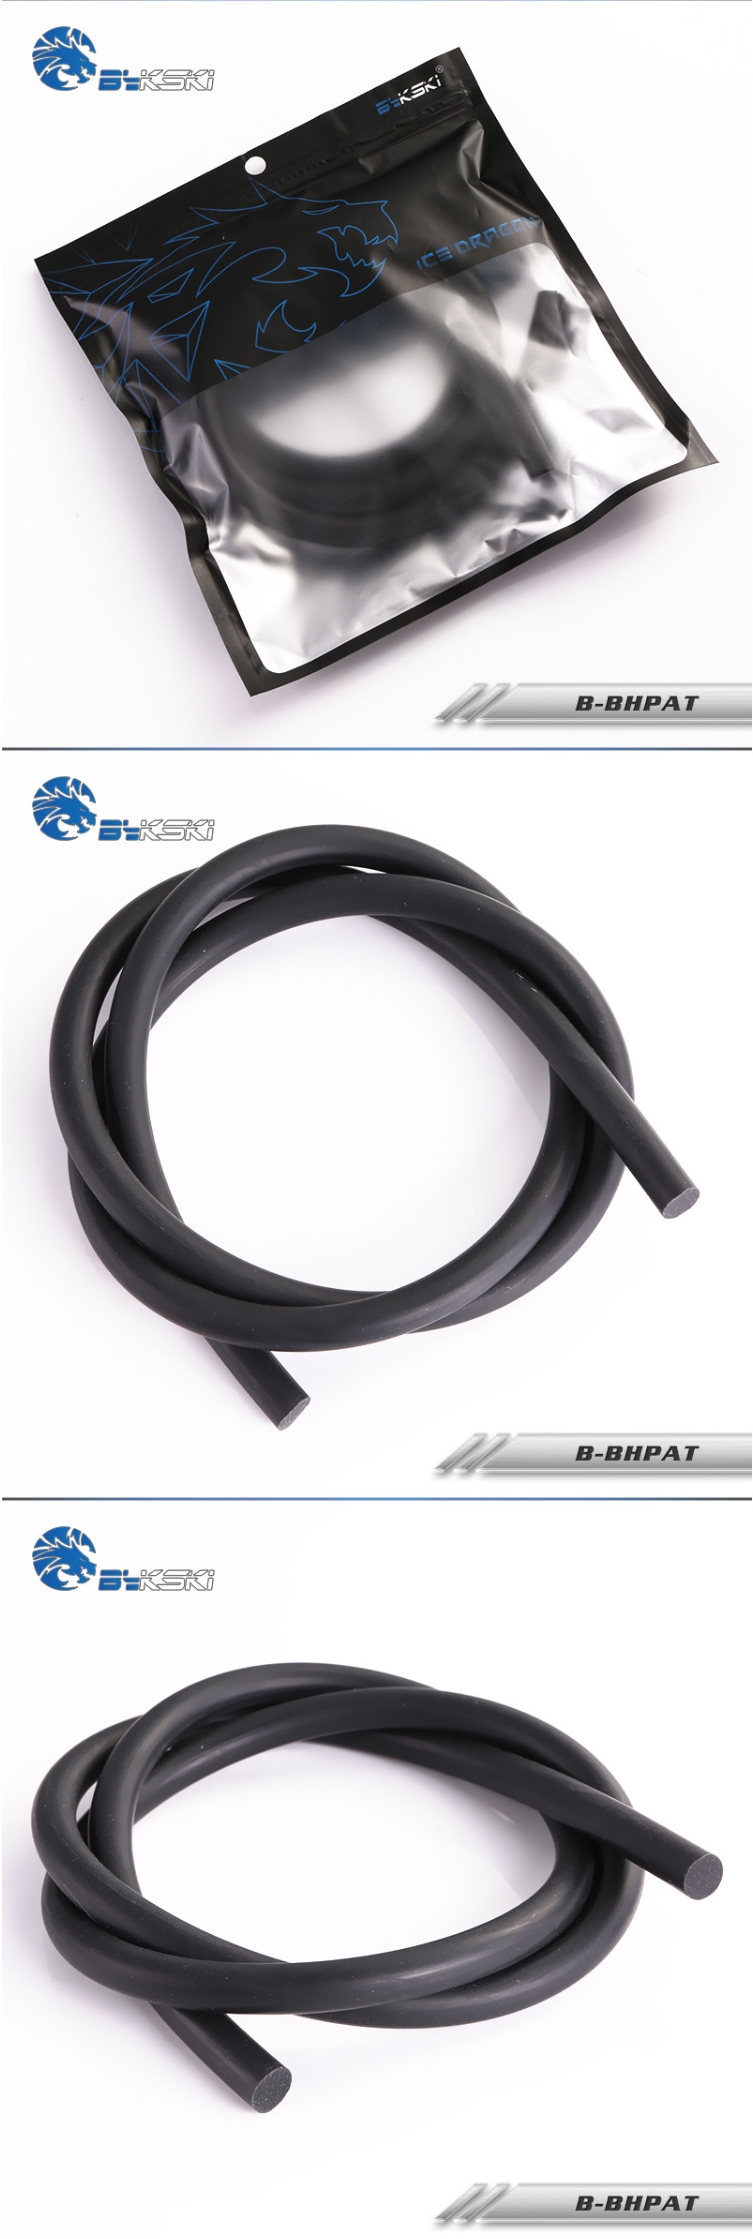 A large marketing image providing additional information about the product Bykski 8/12mm OD Hard Tubing Bending Rubber - Additional alt info not provided